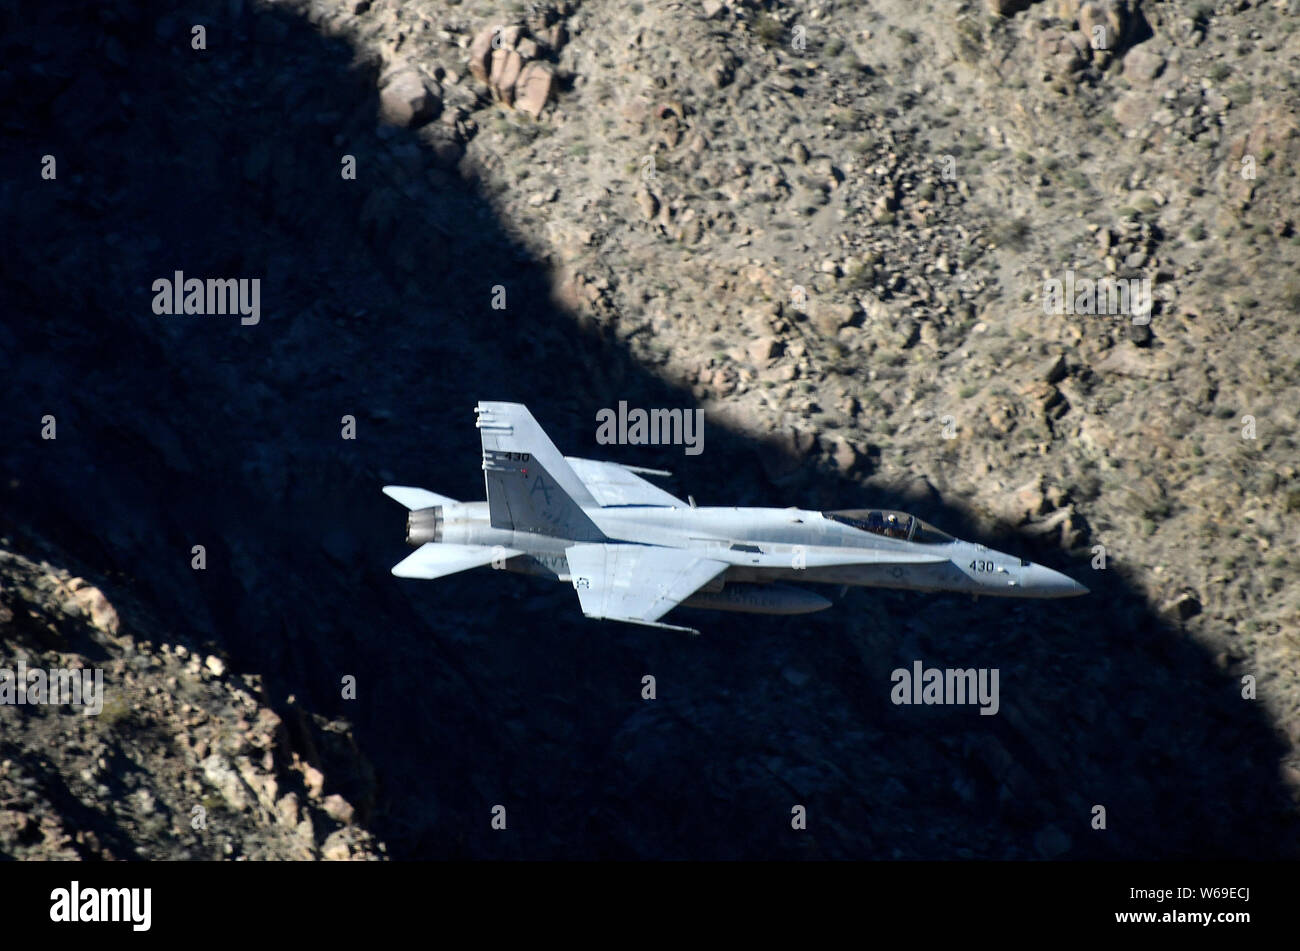 F-18 makes a high speed pass up to 500 mph through StarWars Canyon the Jedi Transition in Panamint Spring/ Death Valley back in March 2019. Today a Navy F-18 jet crash down canyon from the Farther Crawley Overlook with 7 people hurt and the pilot still missing, Death Valley CA. July 31, 2019.Photo by Gene Blevins/ZumaPress. Credit: Gene Blevins/ZUMA Wire/Alamy Live News Stock Photo